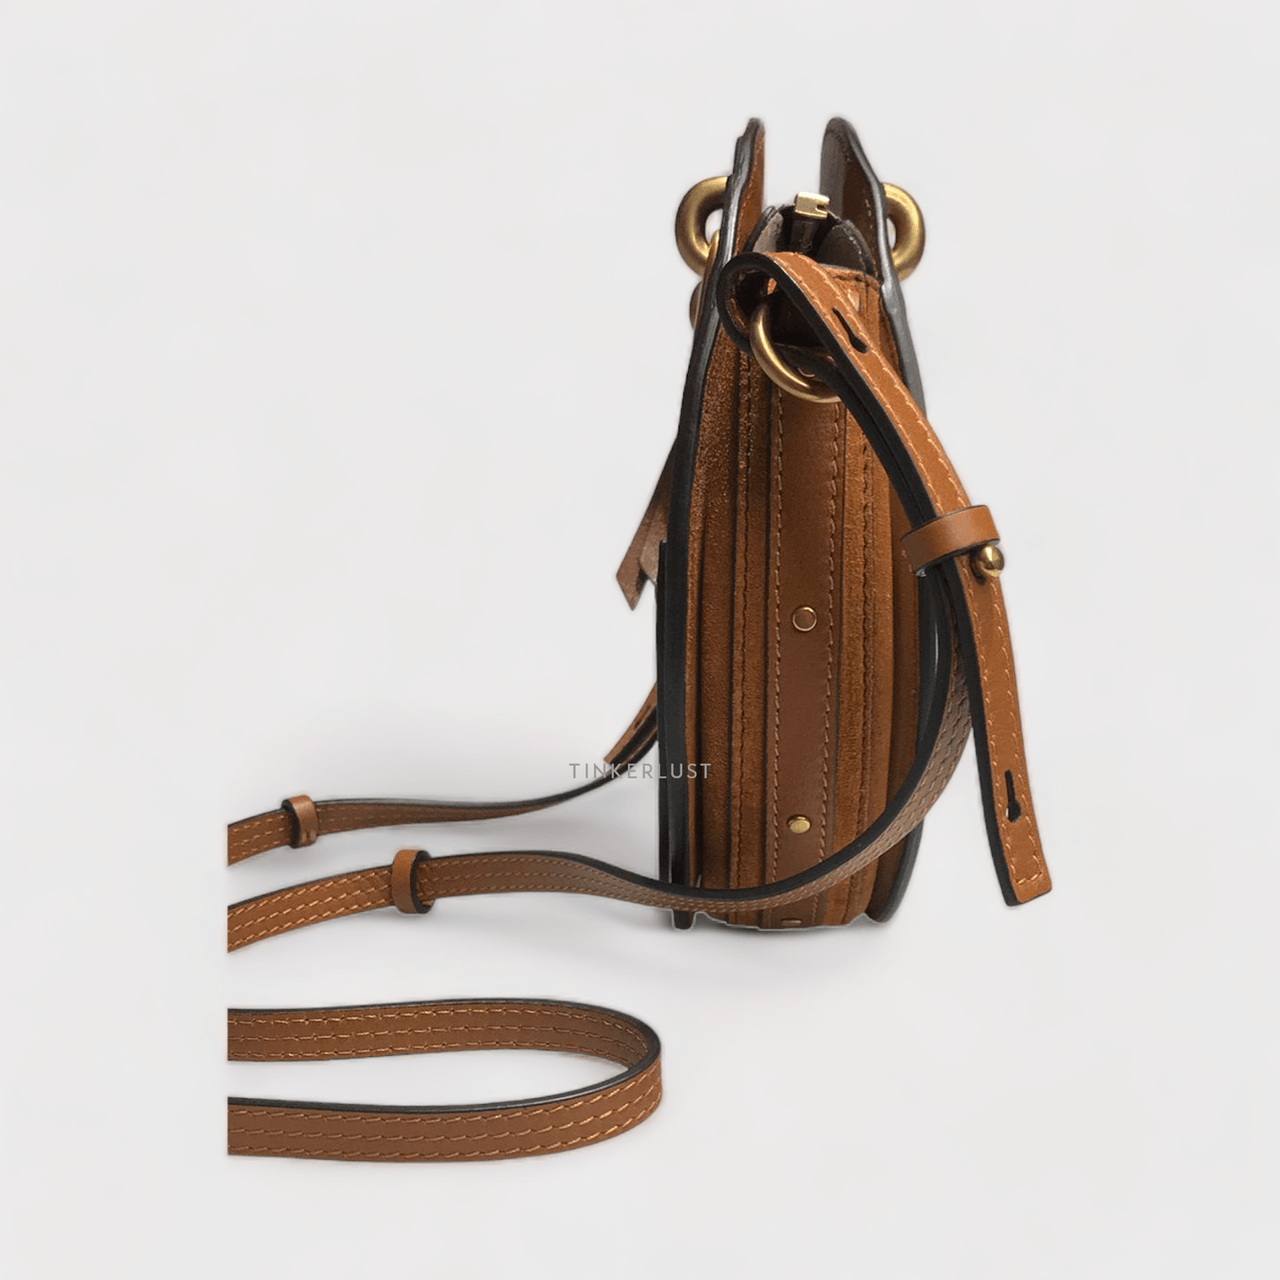 Chloe Small Pixie Bag in Brown Leather GHW Sling Bag